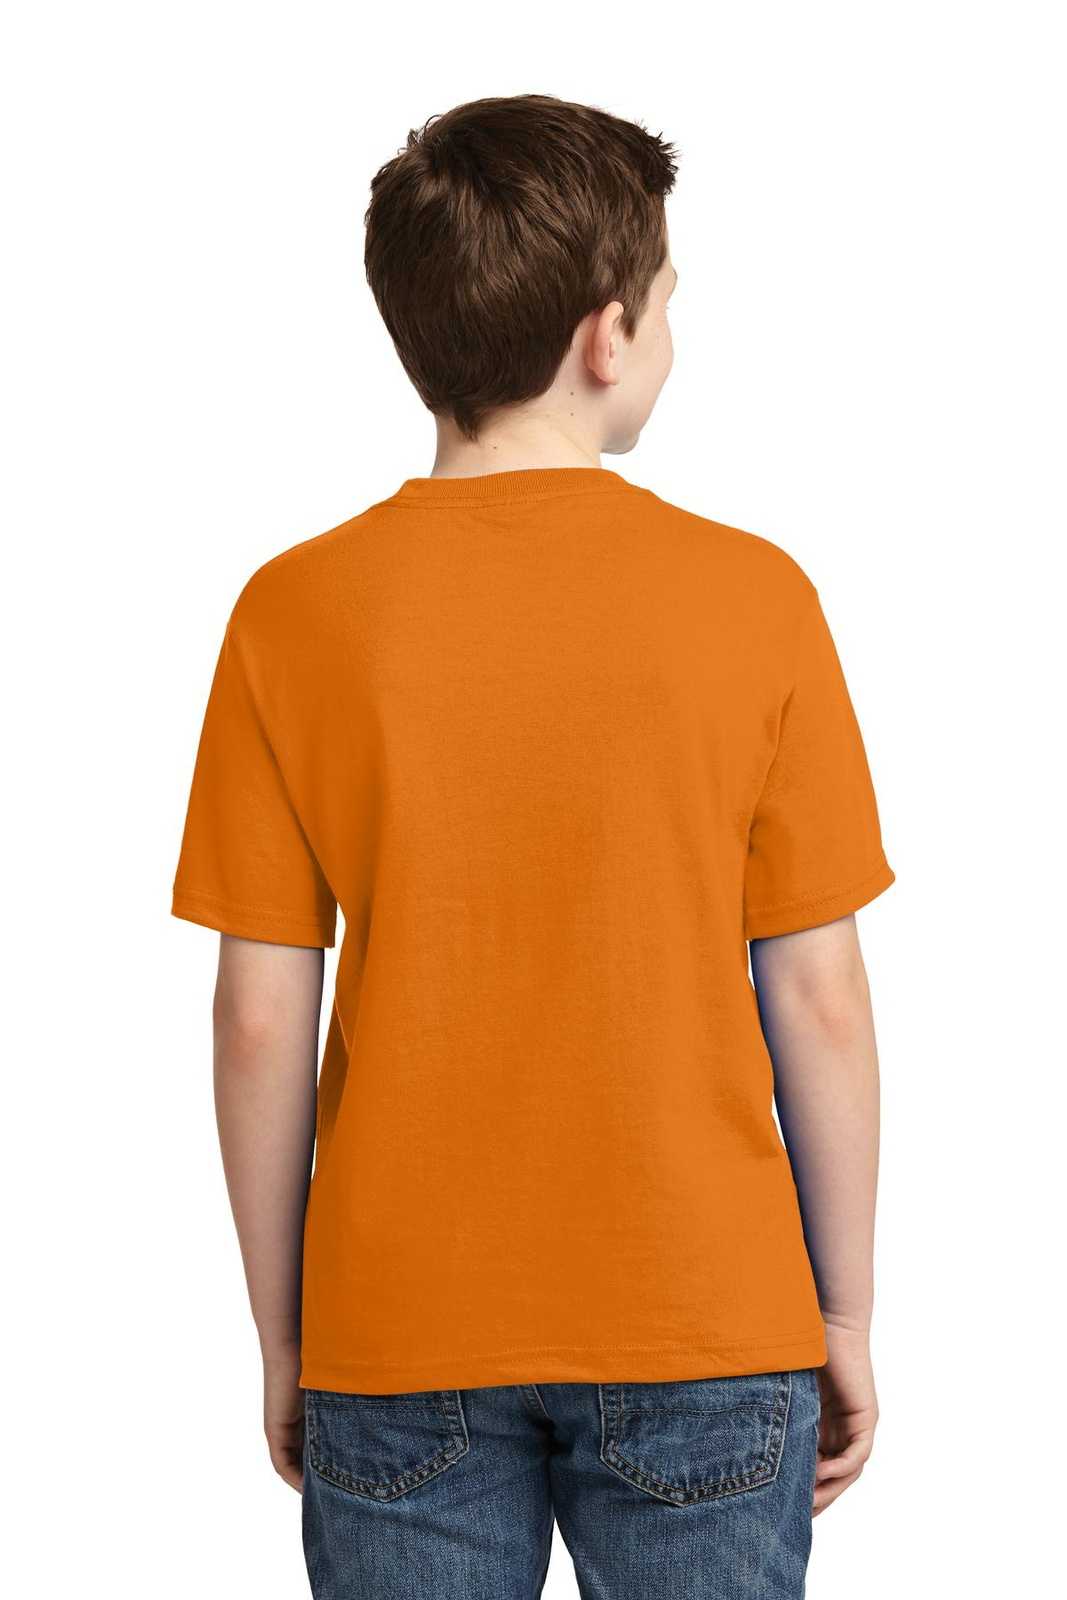 Jerzees 29B Youth Dri-Power 50/50 Cotton/Poly T-Shirt - Tennessee Orange - HIT a Double